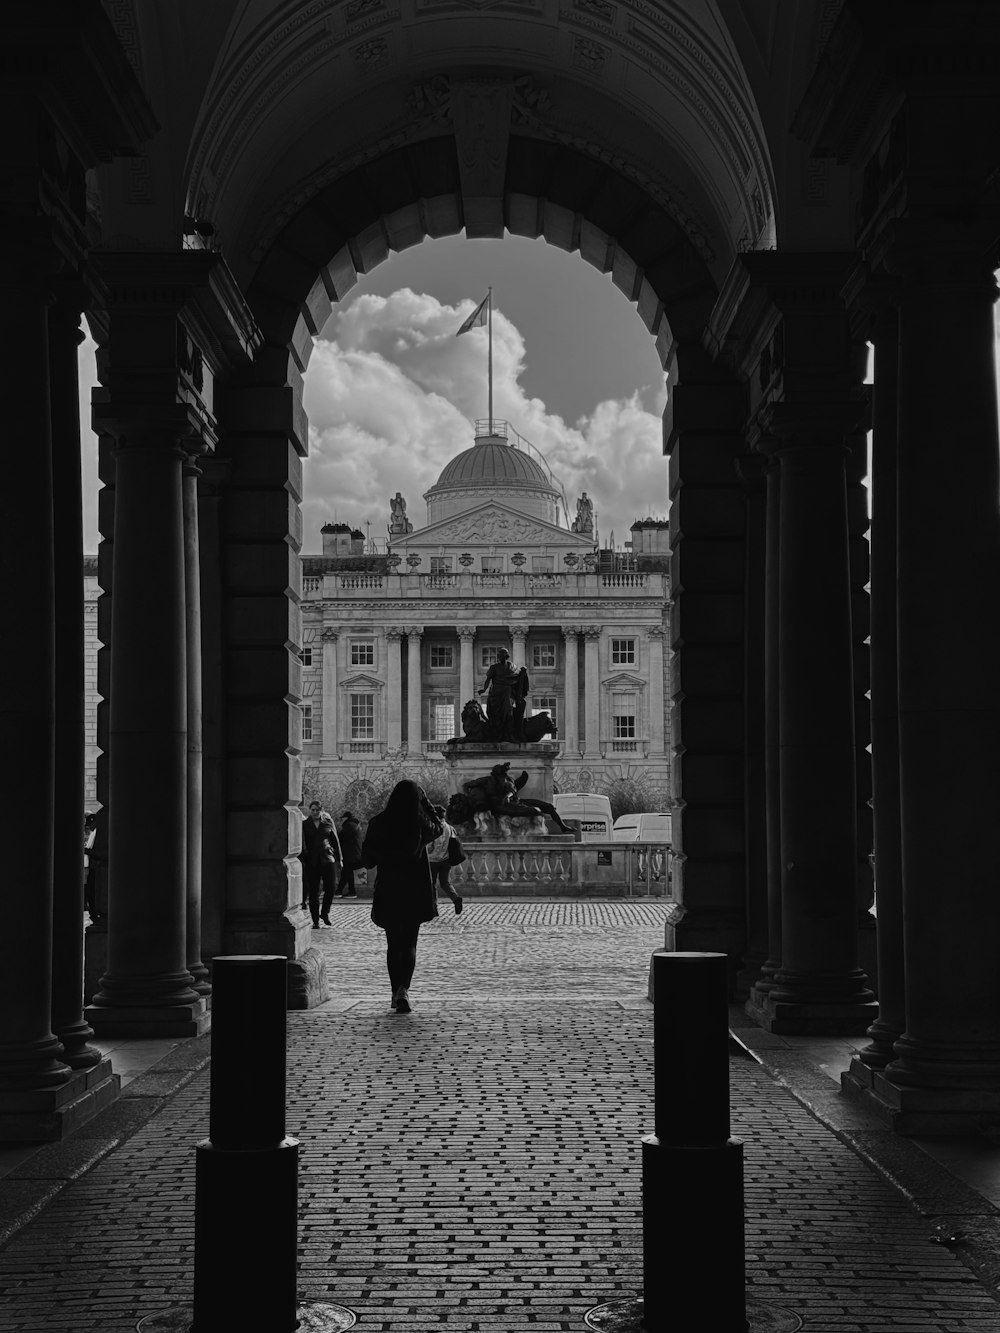 a black and white photo of a person walking through an archway